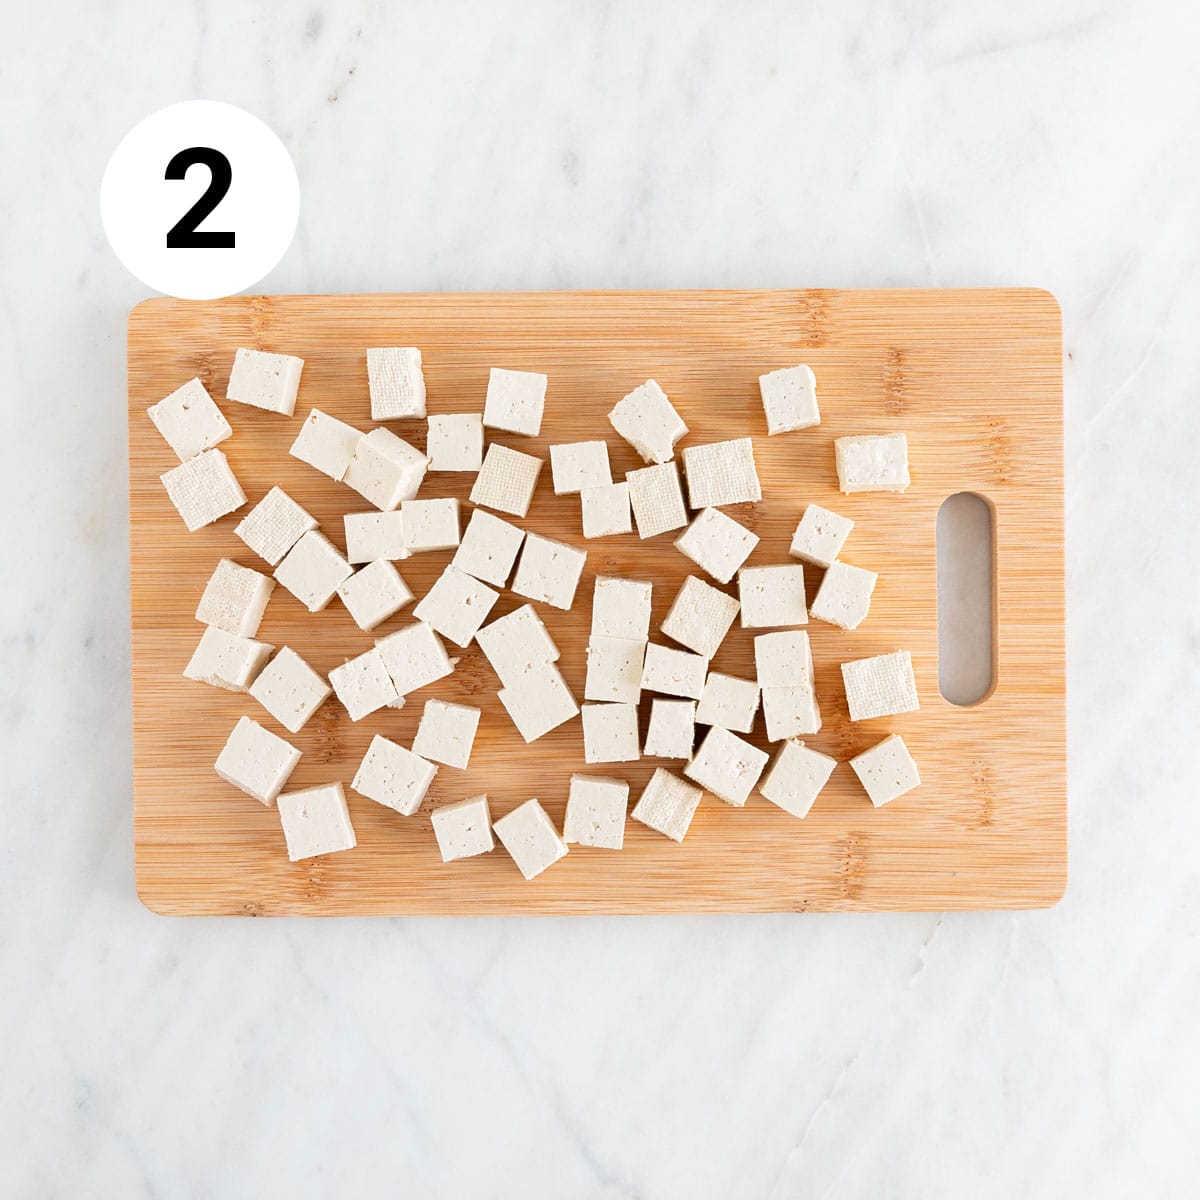 Tofu cubes on wooden cutting board.